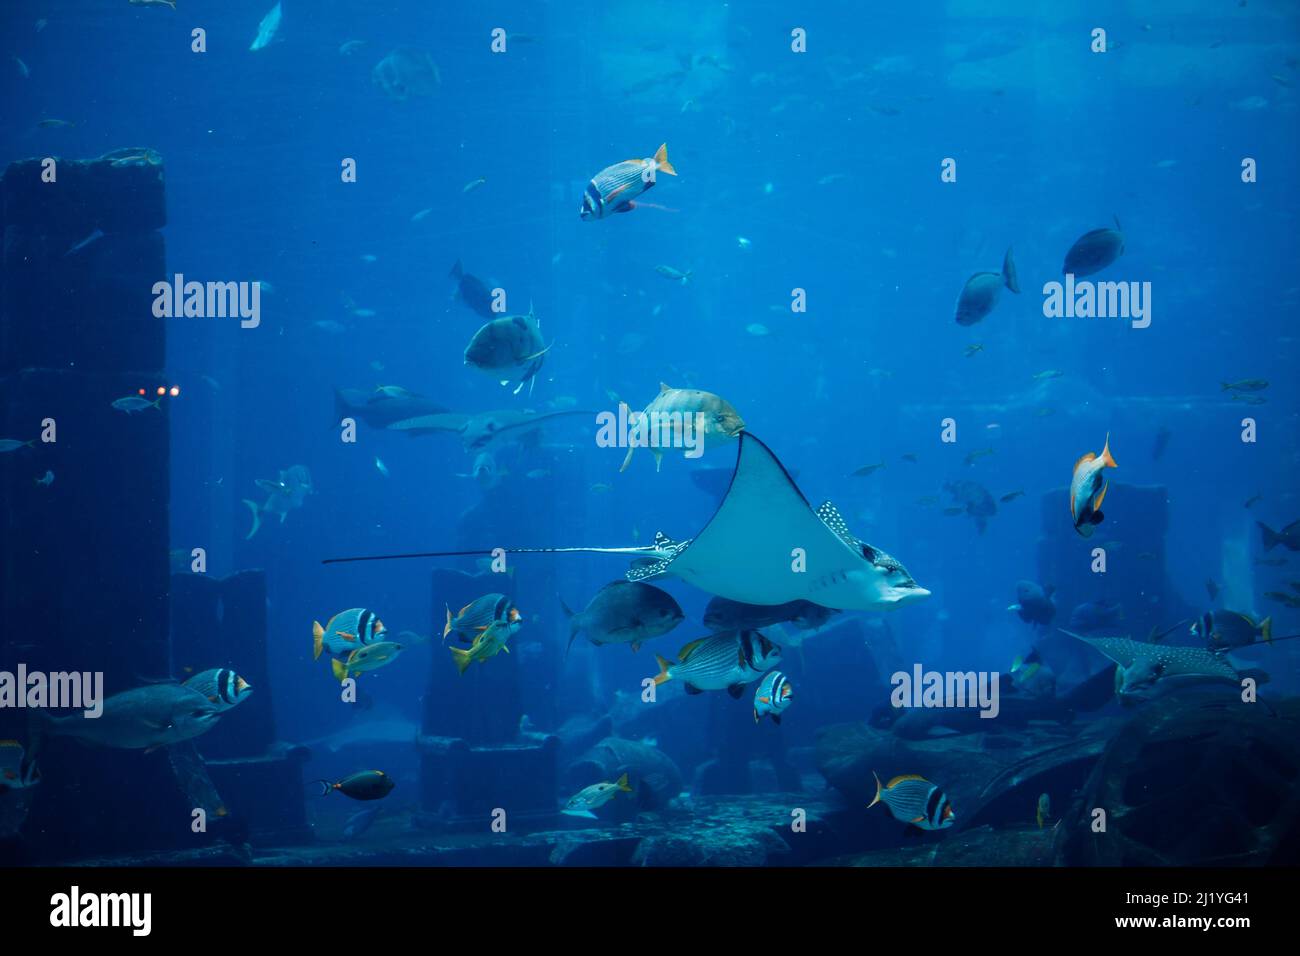 Underwater landscape with wildlife and a stingray. Fish swimming in aquarium. Stock Photo